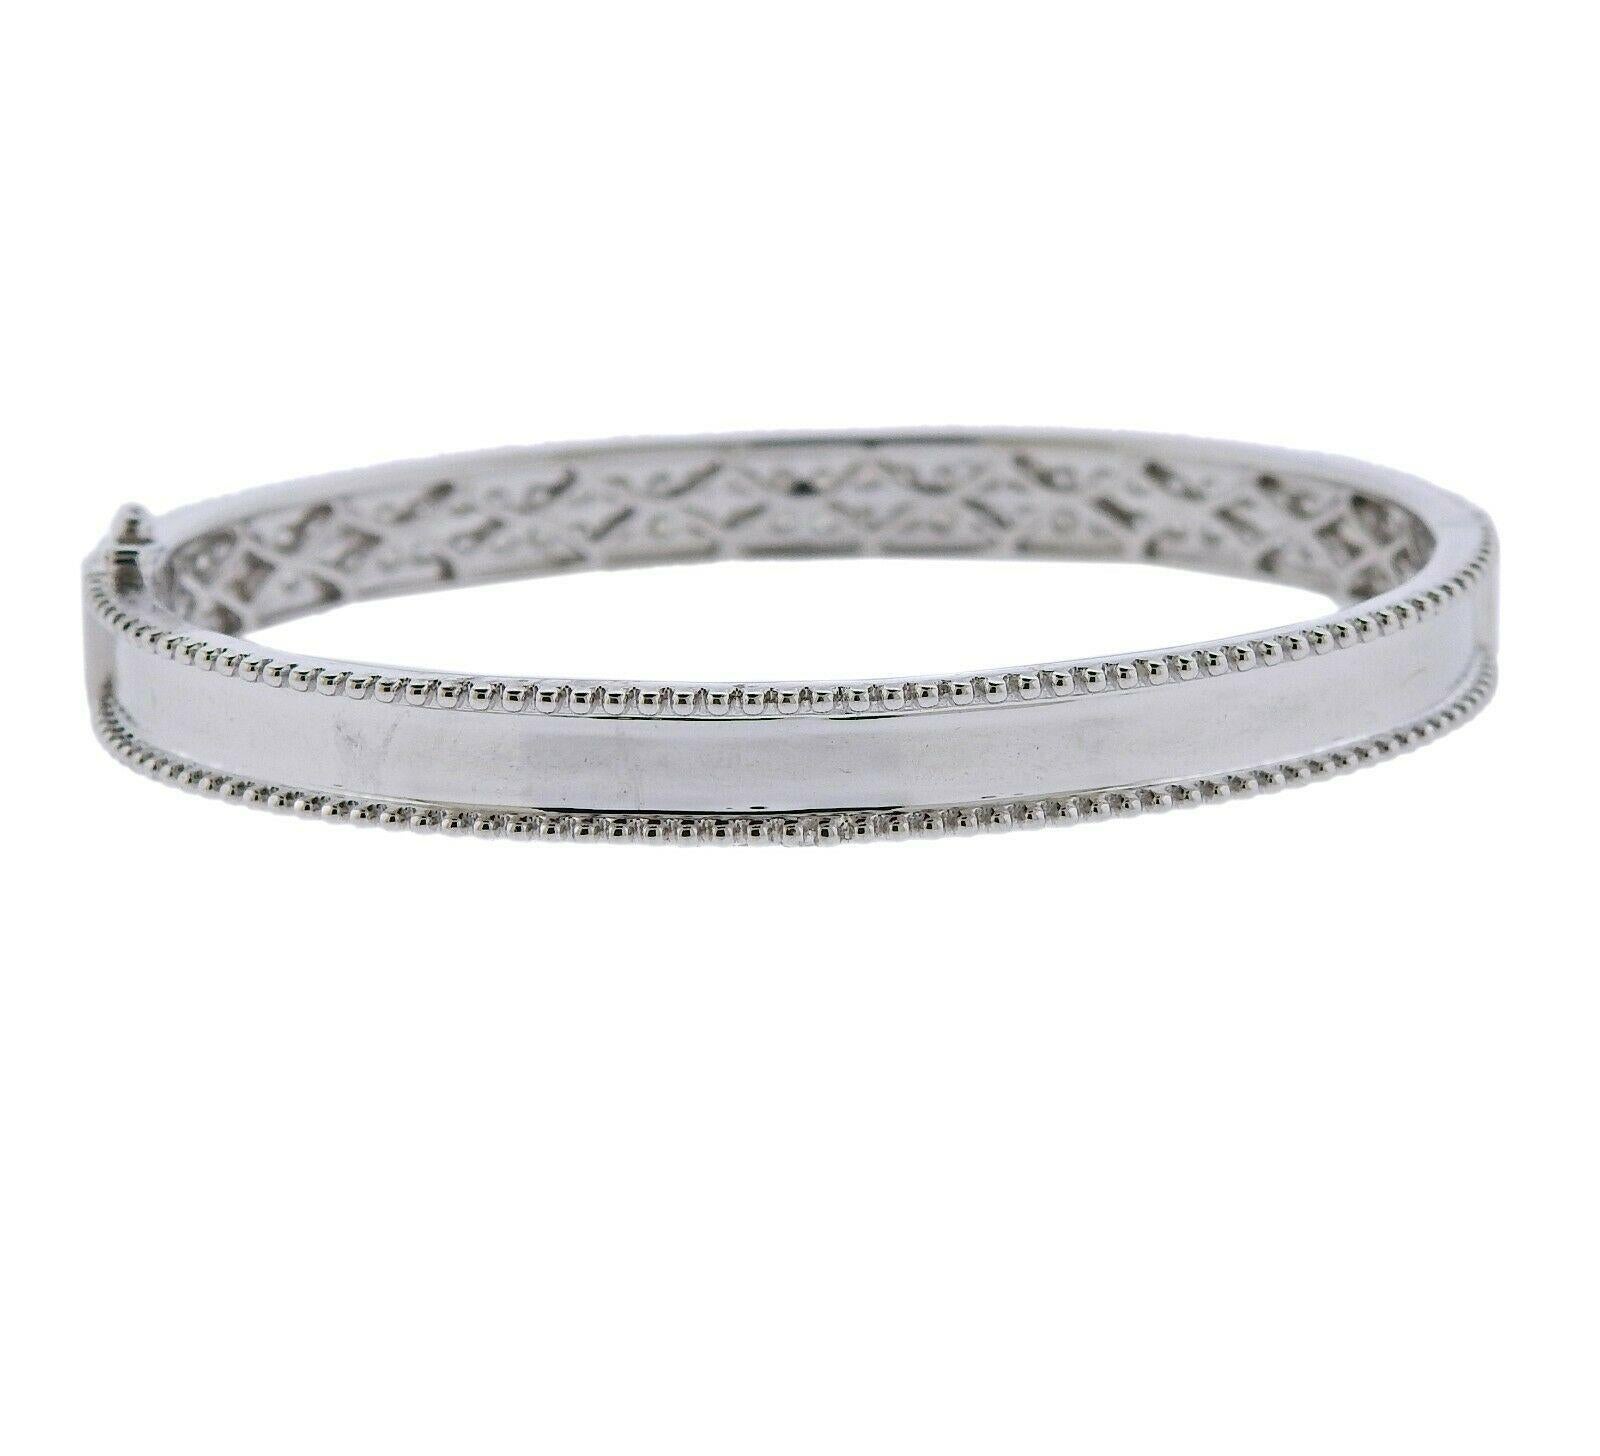 18k white gold bracelet featuring approximately 2.24ctw of G/VS diamonds. Retail is $11,200. Bracelet will fit approx. 7